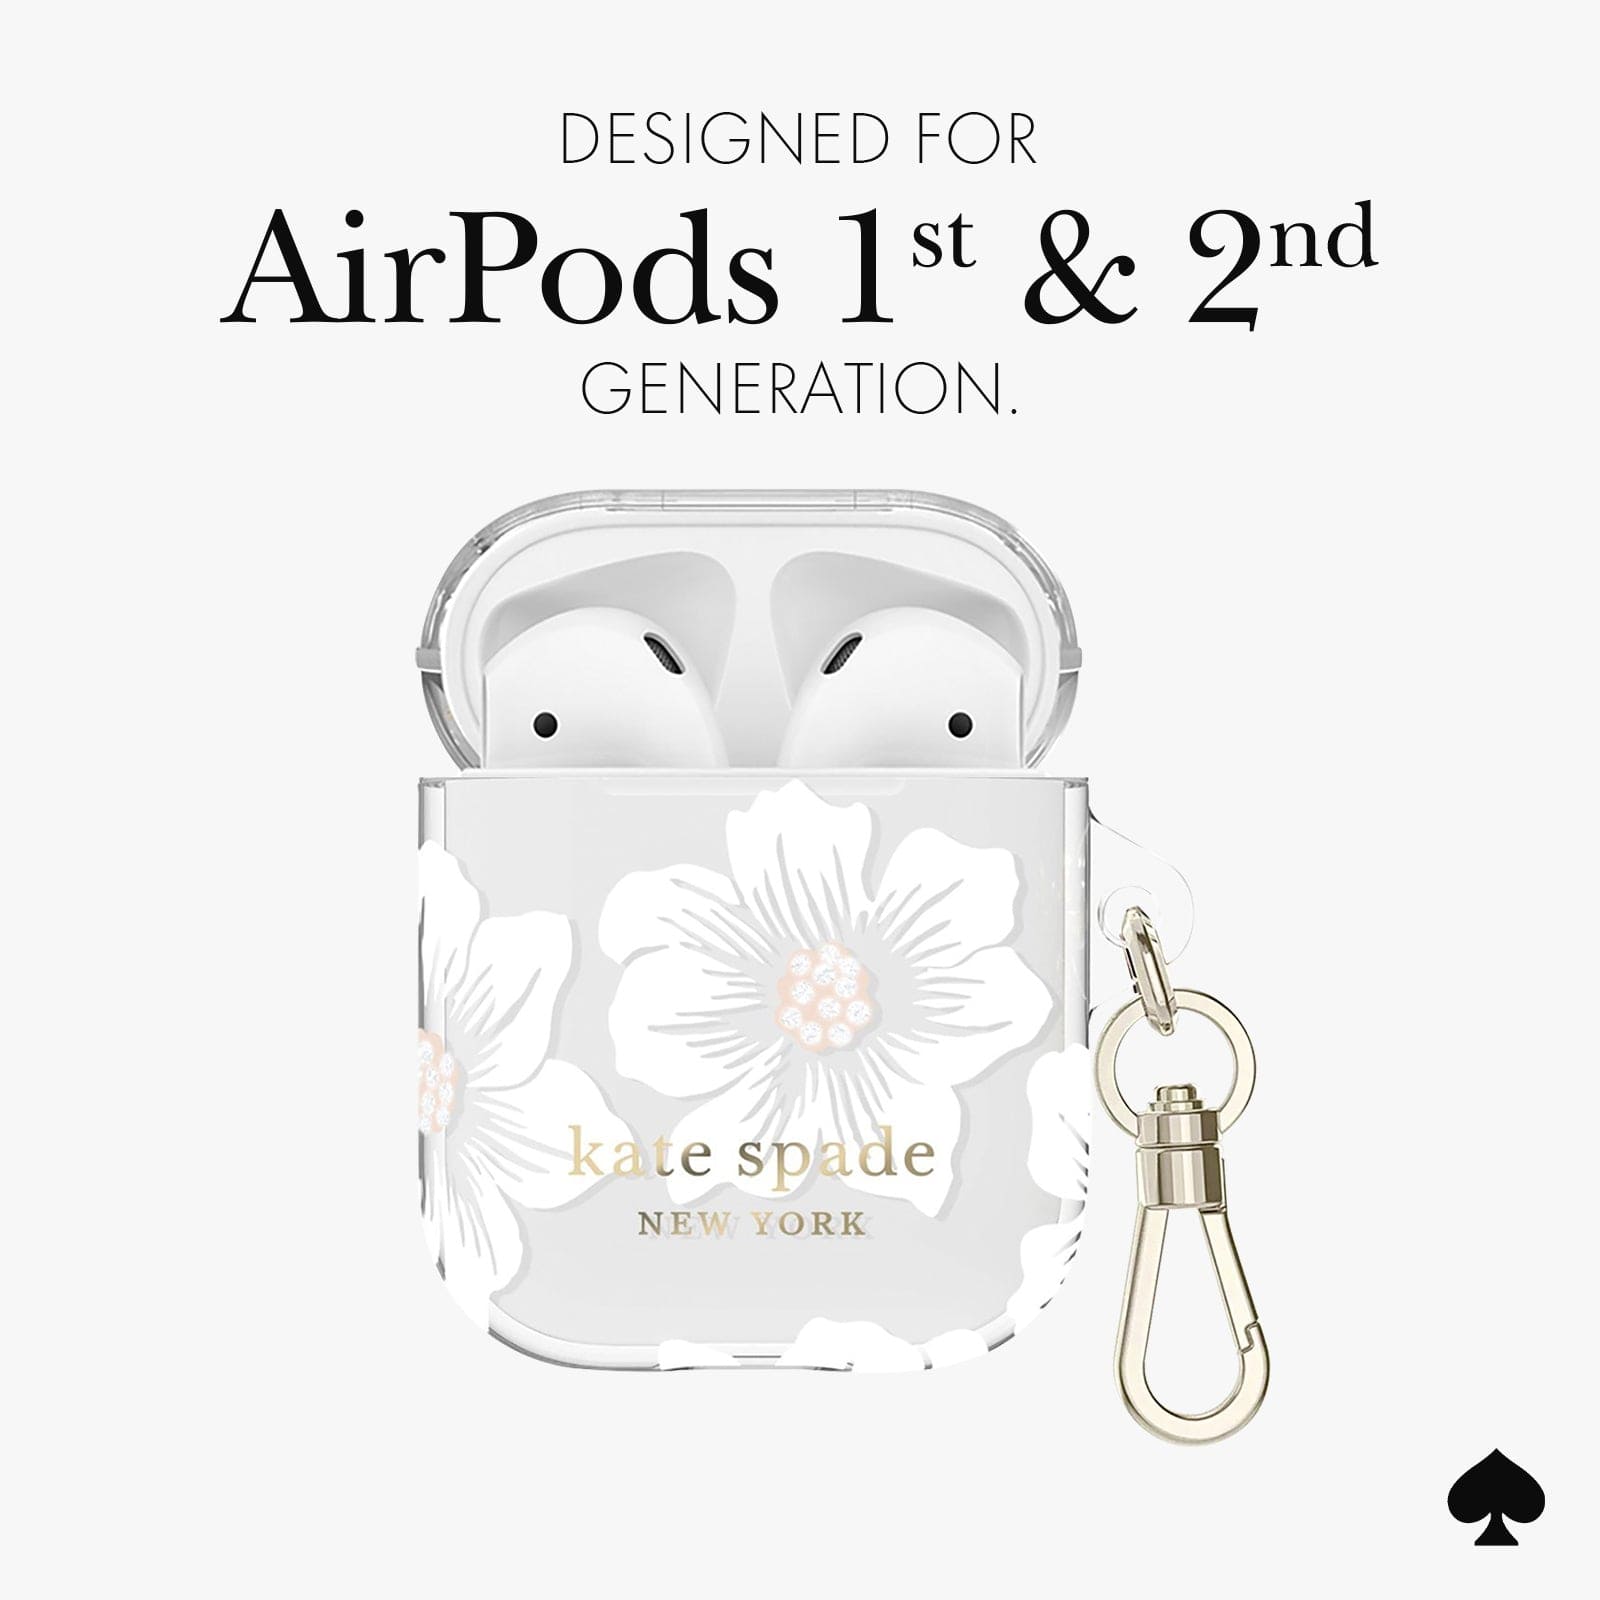 DESIGNED FOR AIRPODS 1ST AND 2ND GENERATION